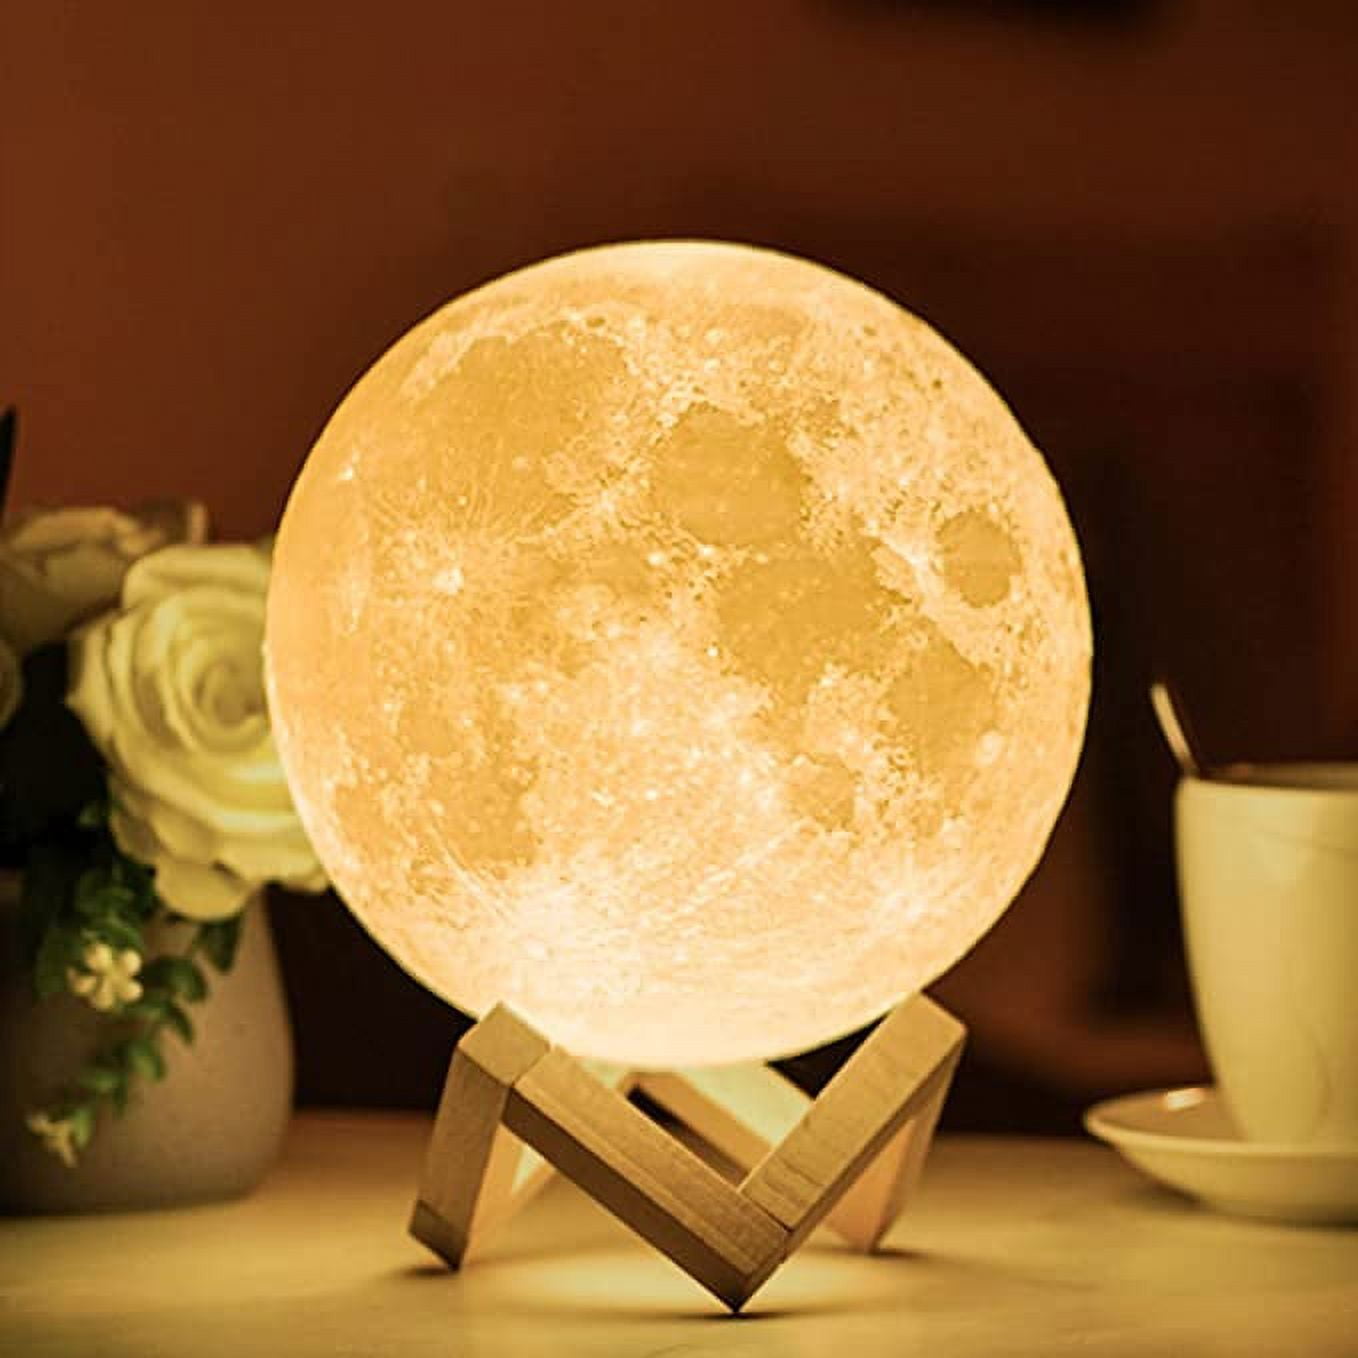 Moon Lamp, Balkwan 4.7 inches 3D Printing Moon Light uses Dimmable and  Touch Con